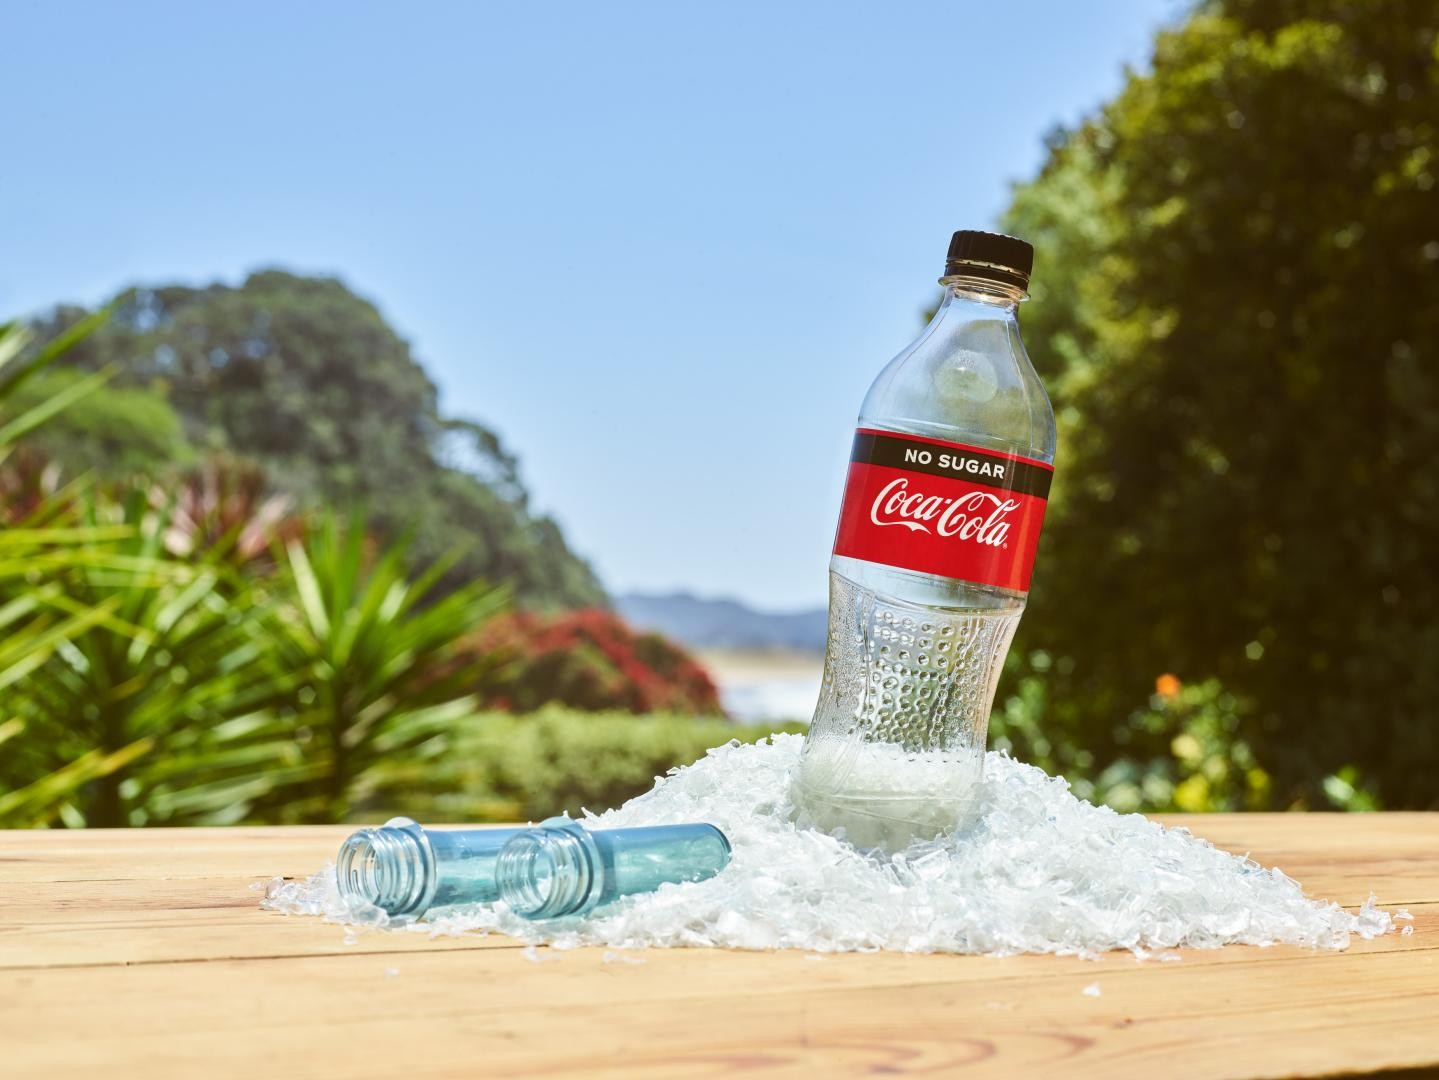 Coca-Cola for America’s Cup, packaging sustainability to be a key focus